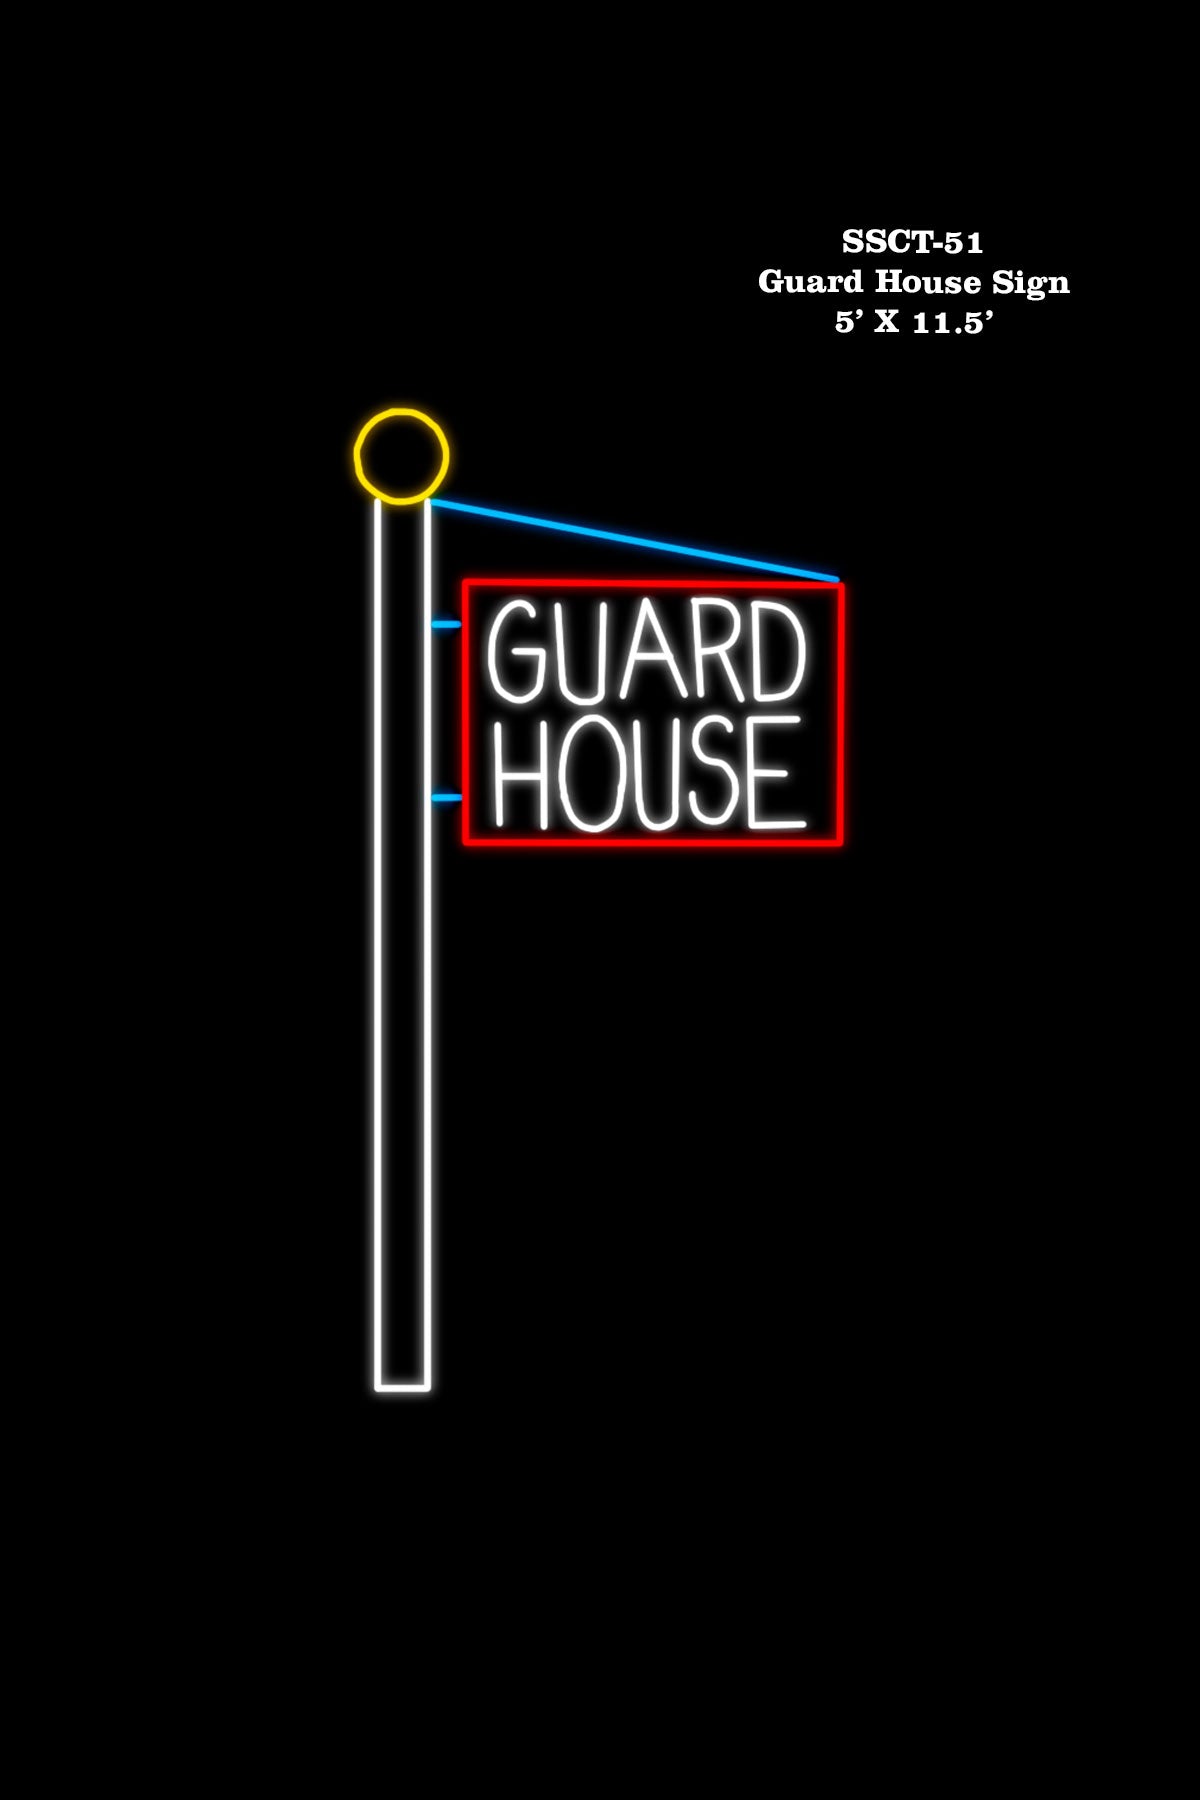 GUARD HOUSE SIGN